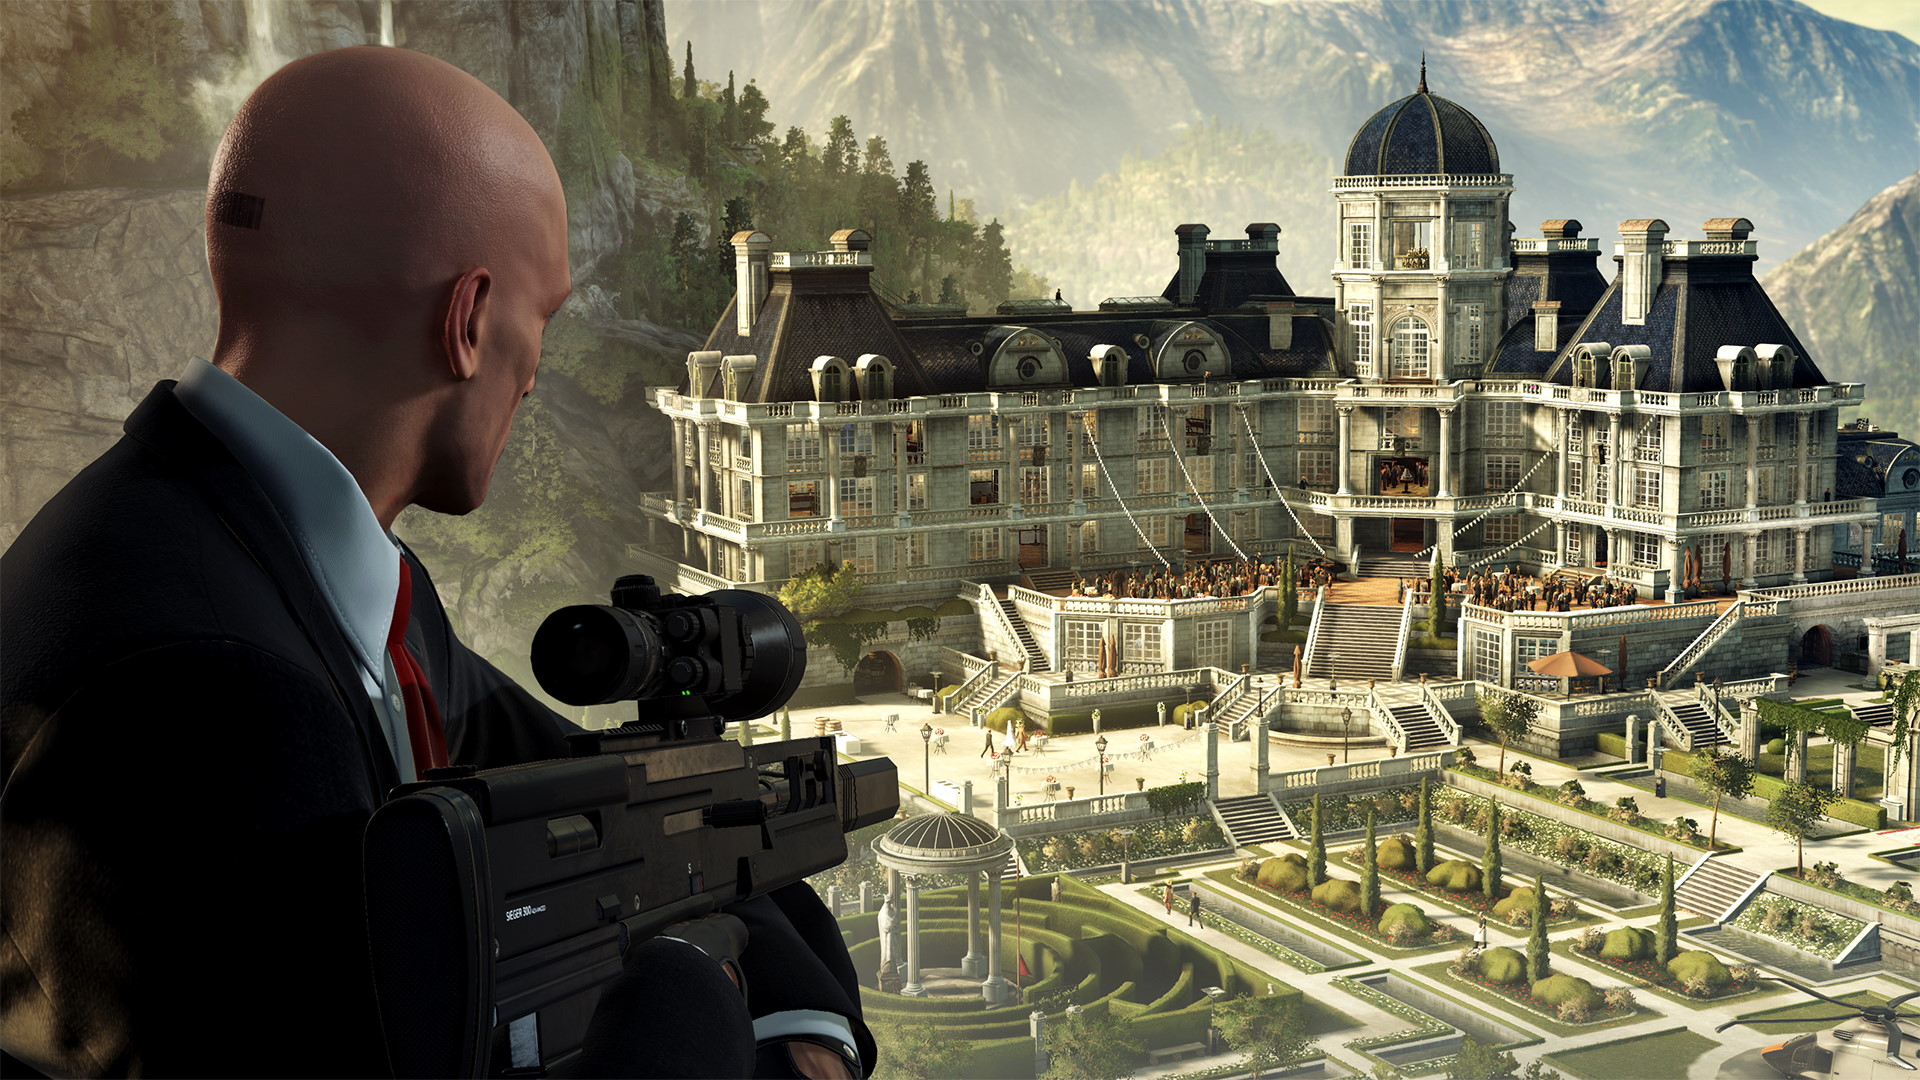 Hitman 3's first big patch drops, and you know you need that tactical  turtleneck — GAMINGTREND